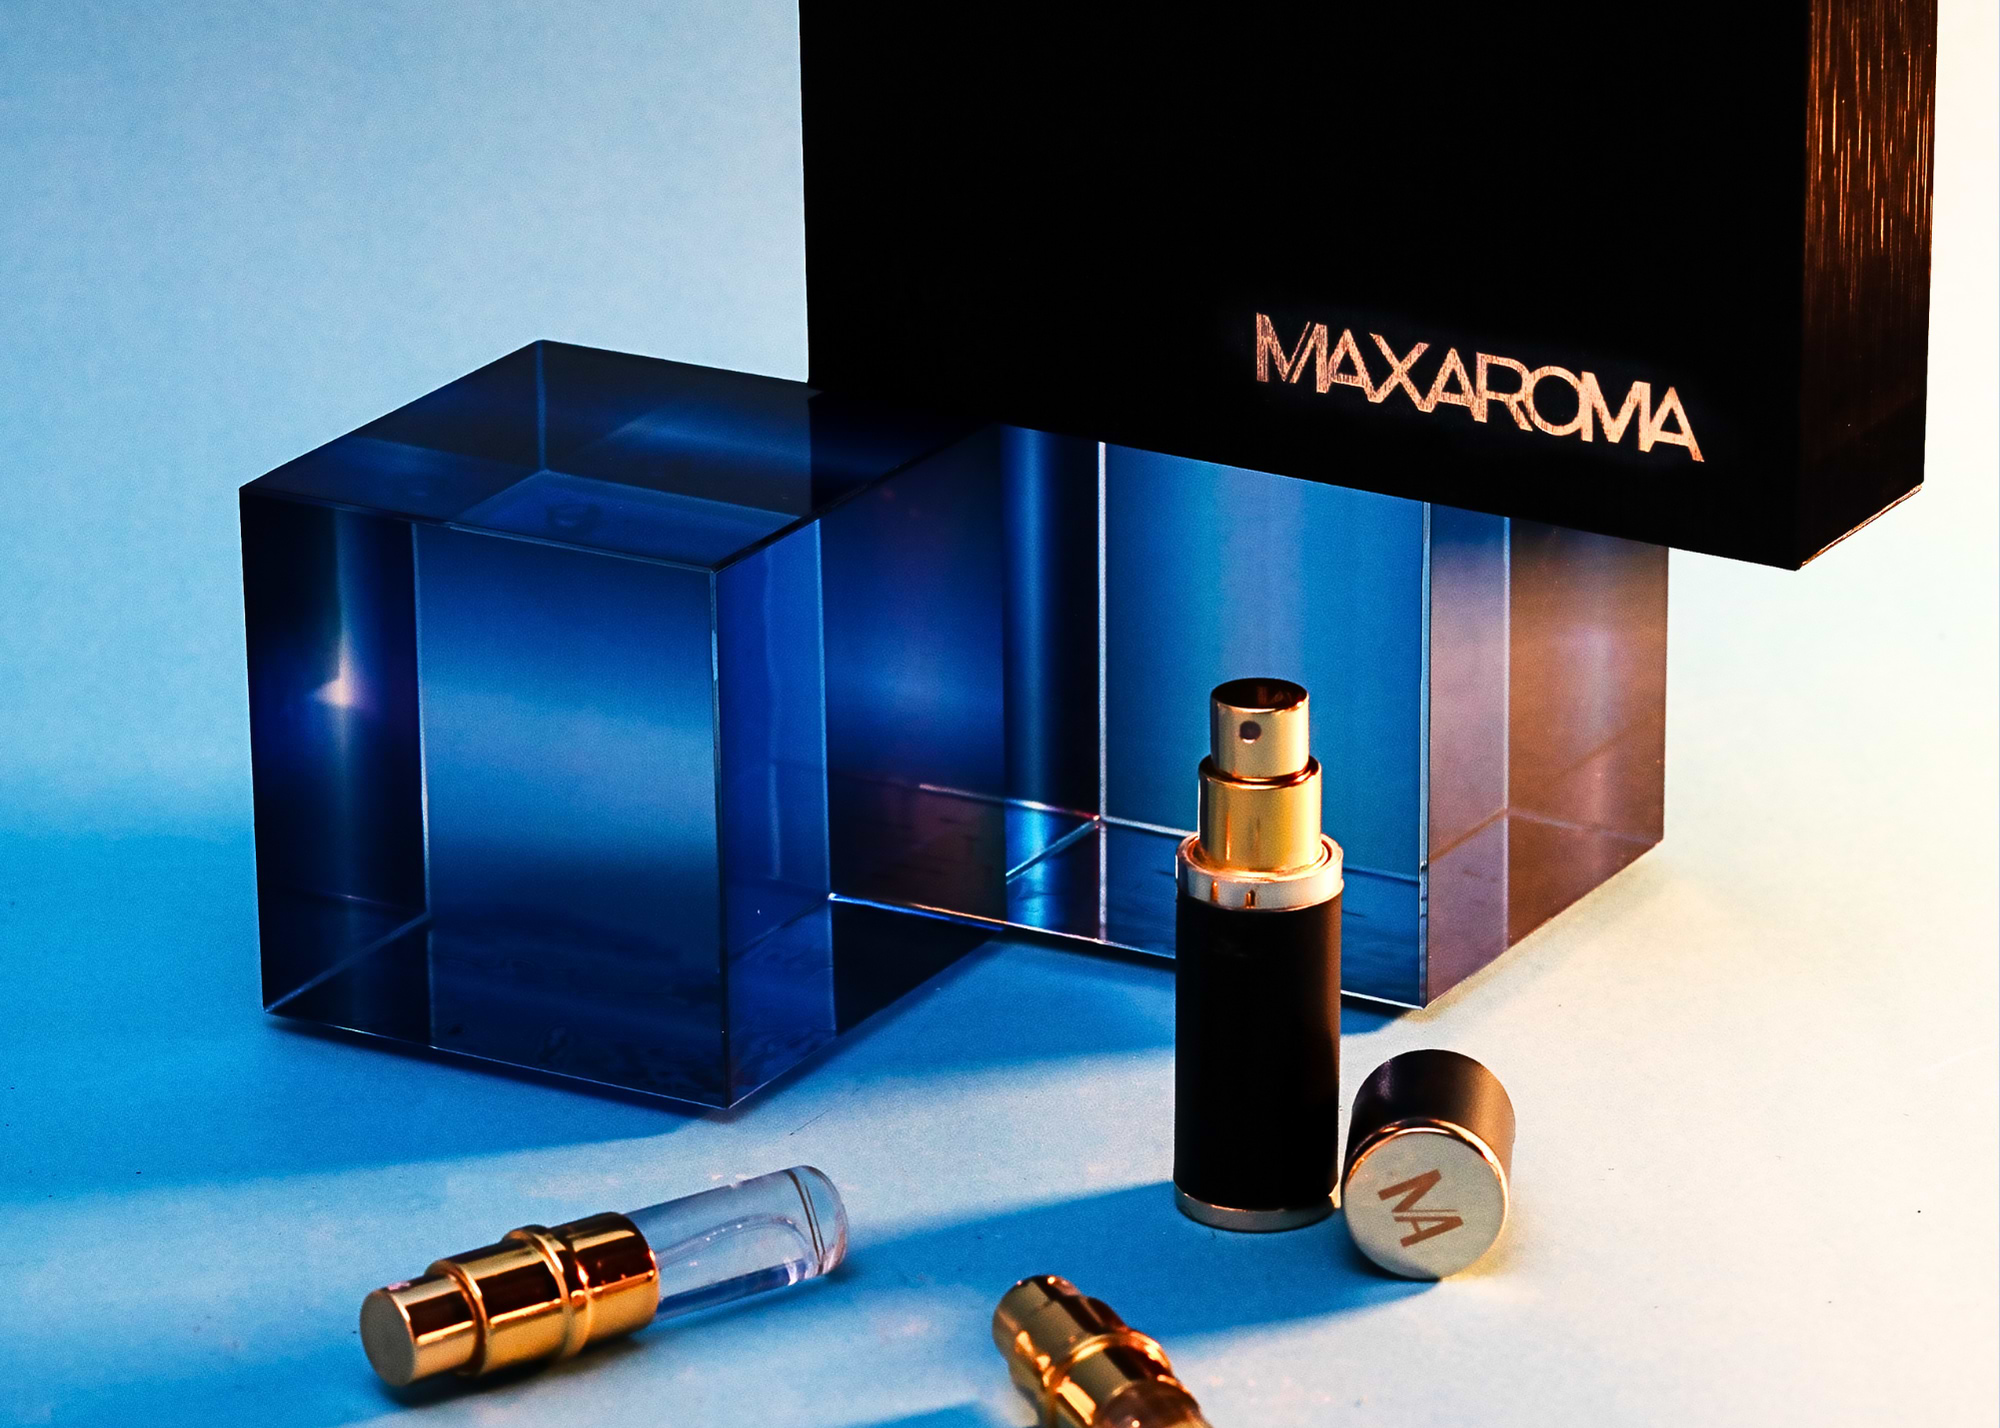 Give Them MAXAROMA Gift Card